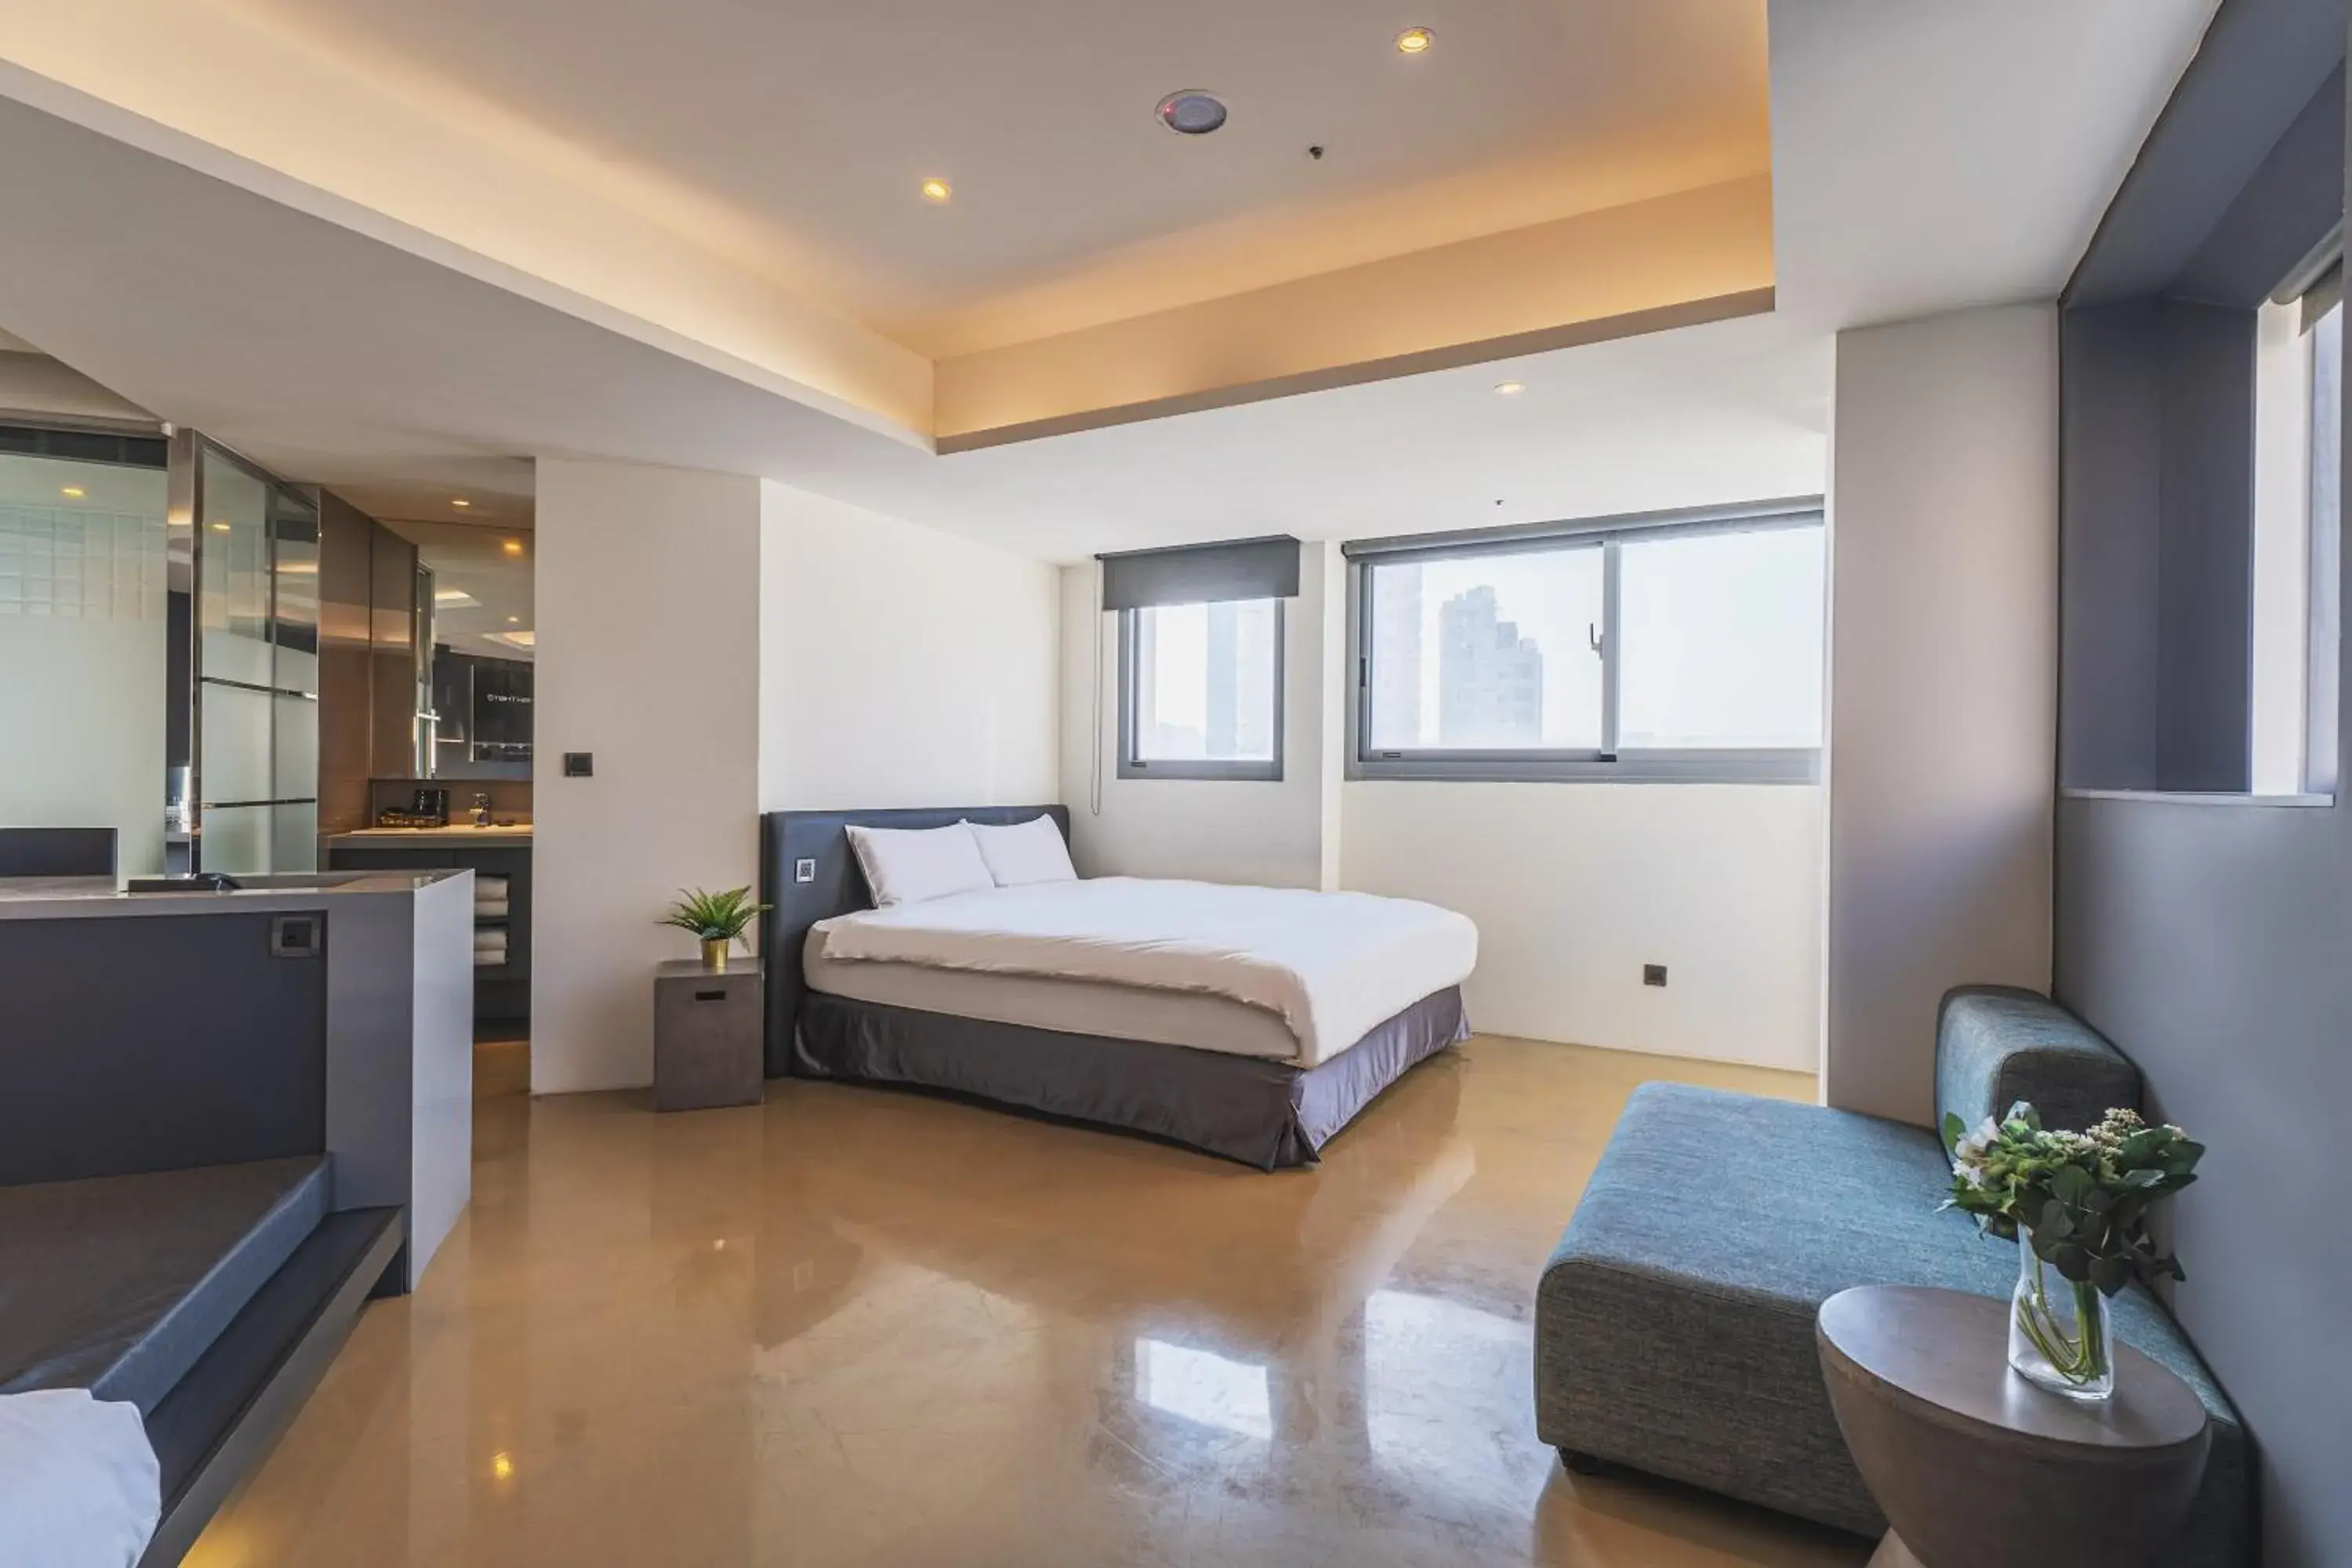 Bedroom in CHECK inn Taichung LiMing